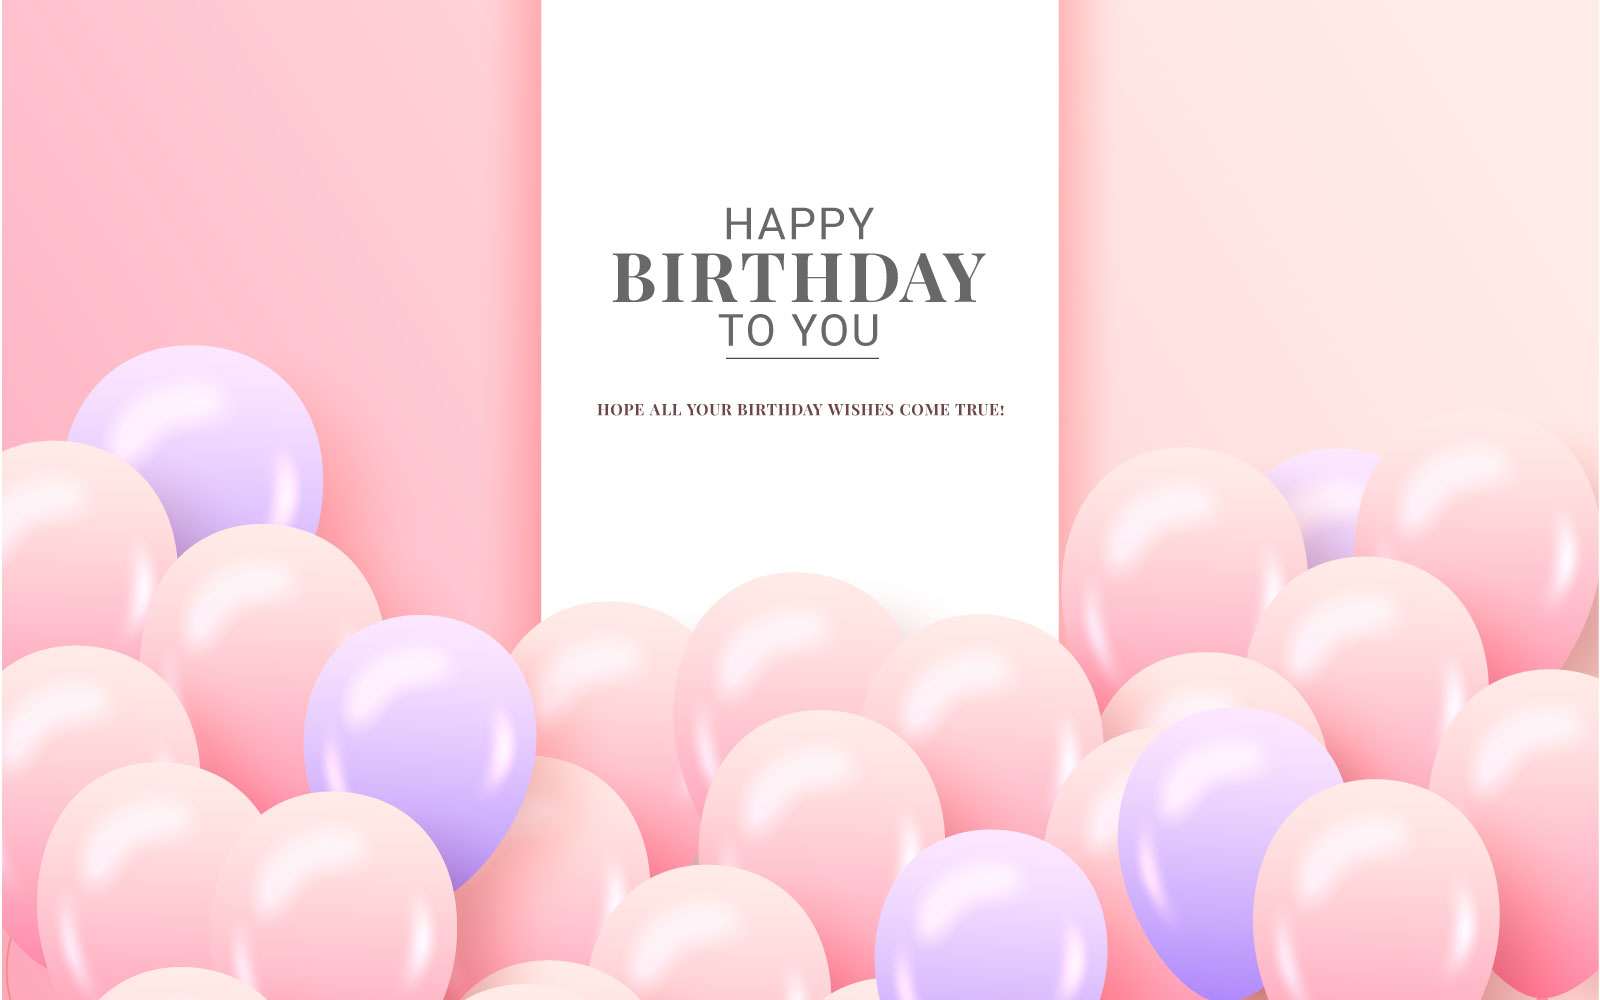 Birthday congratulations banner design with Colorful balloon